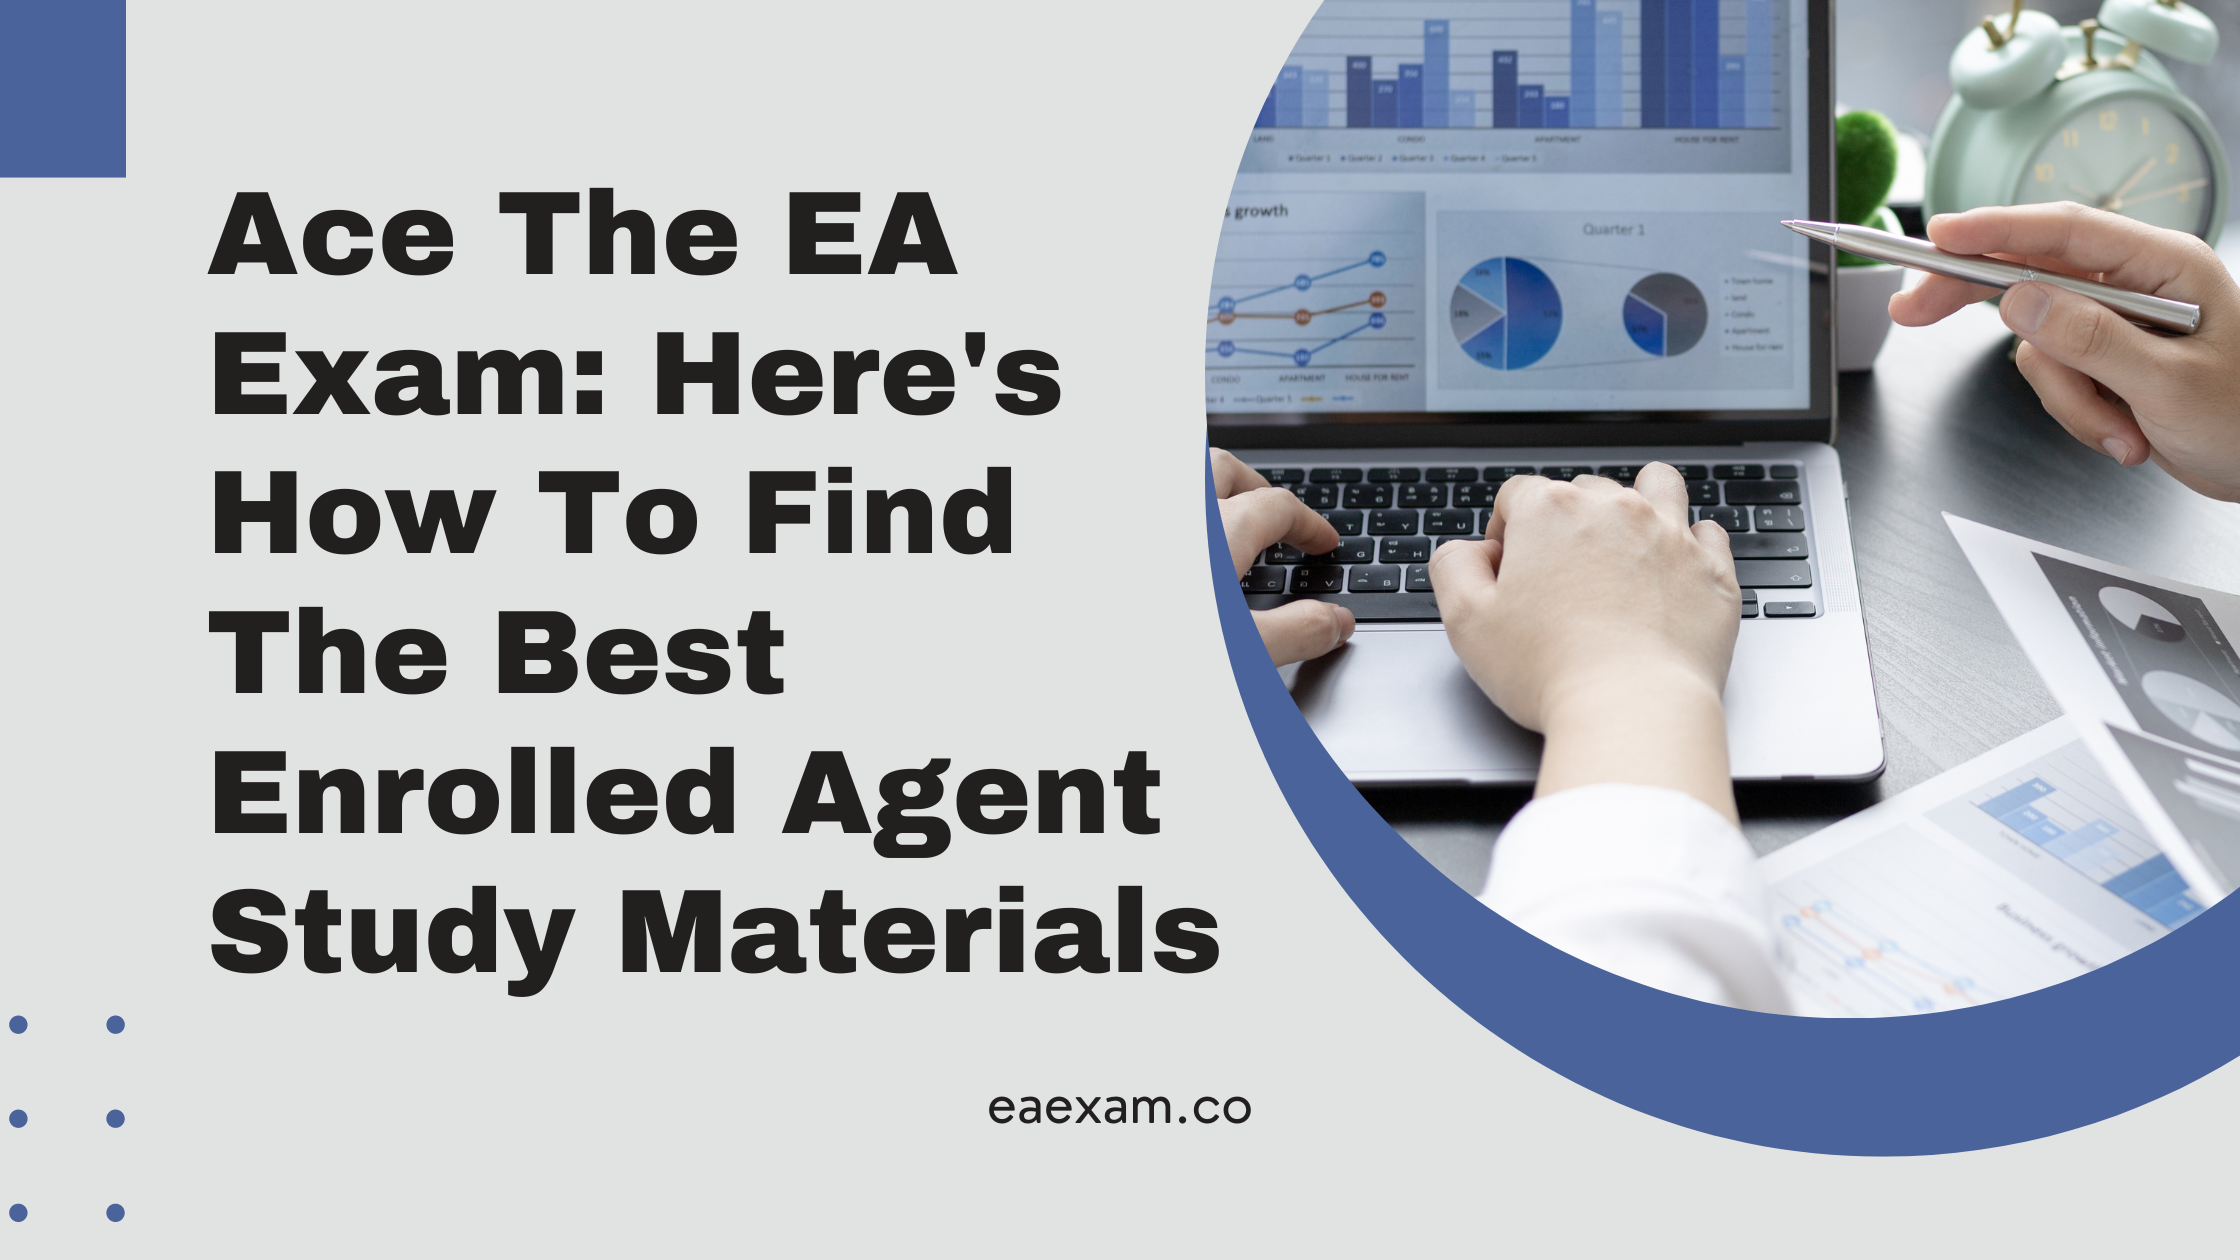 Ace The EA Exam Here’s How To Find The Best Enrolled Agent Study